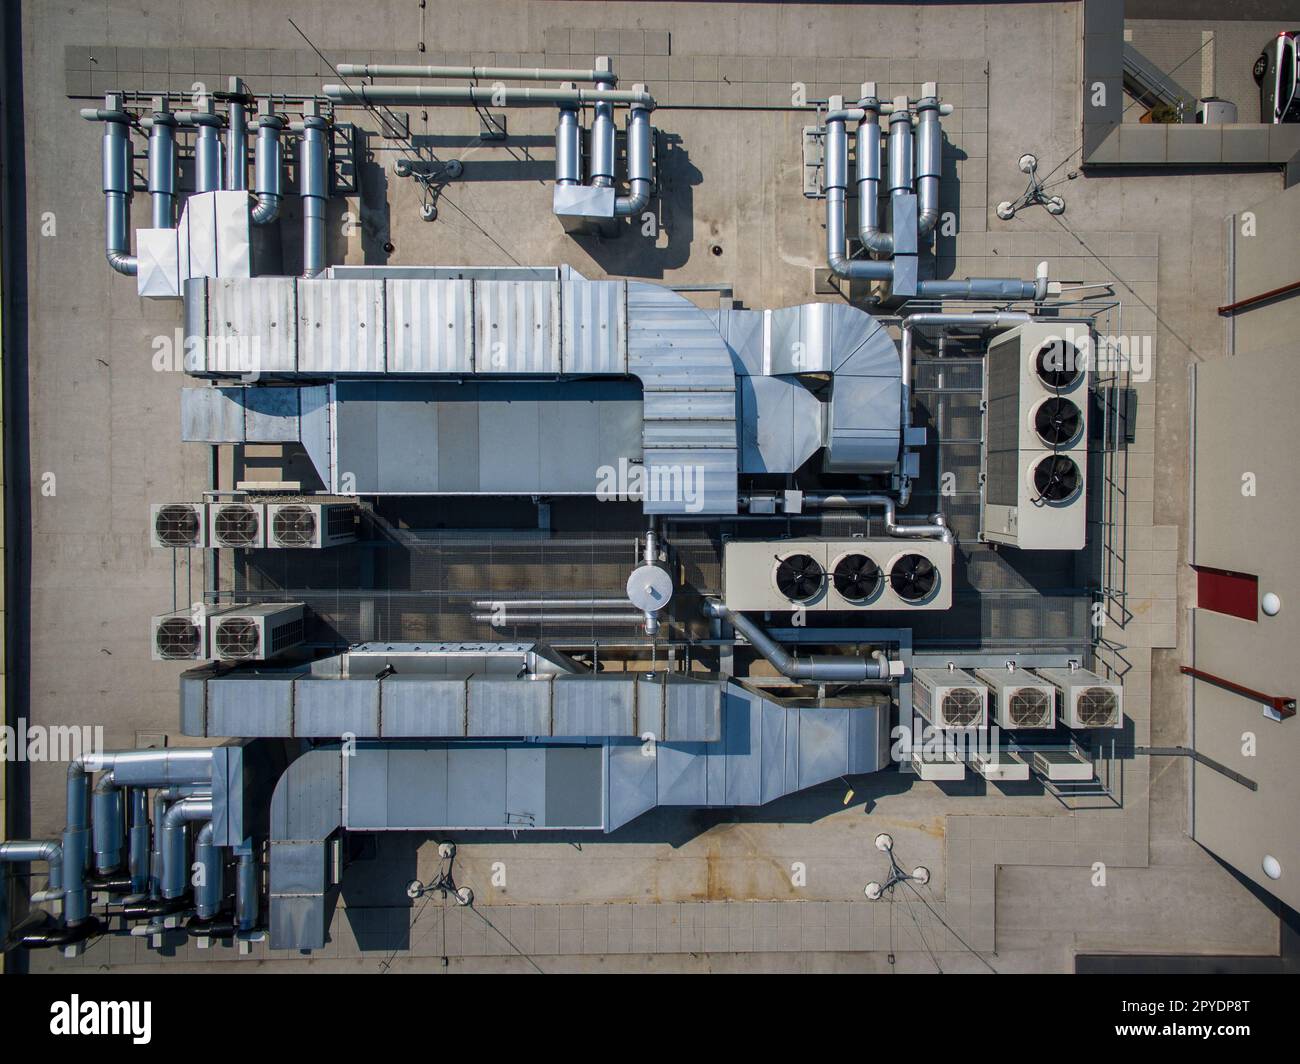 Air conditioning system on the roof of the building, advanced air conditioning and ventilation system, aerial view down the roof of the house, many different ventilation ducts Stock Photo